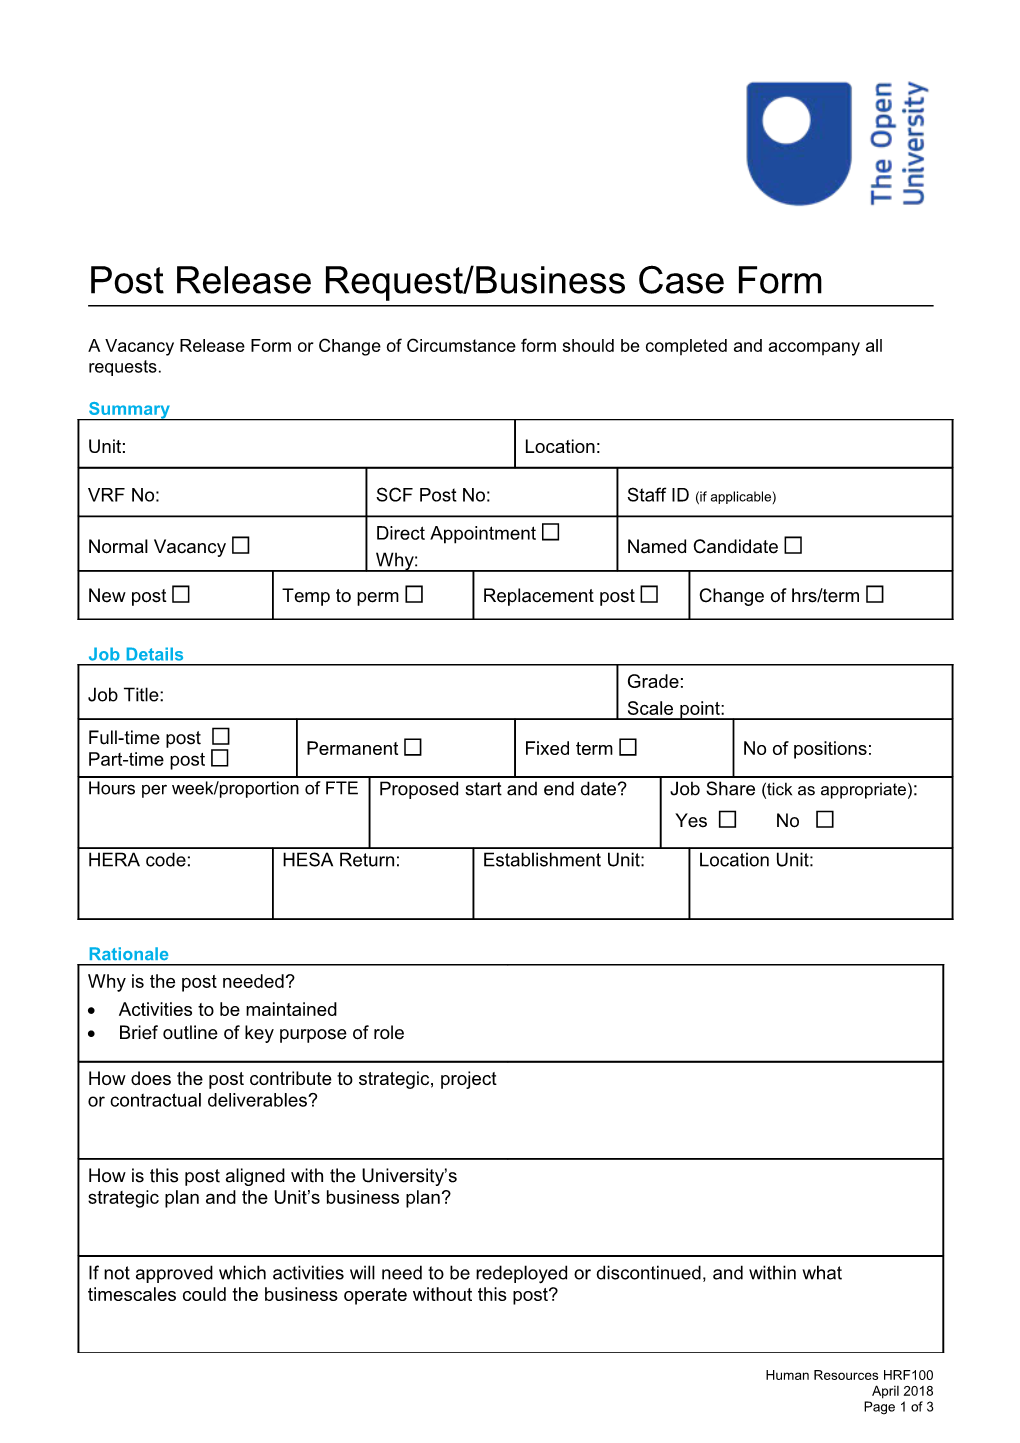 Post-Release-Request-Business-Case-Form-HRF100